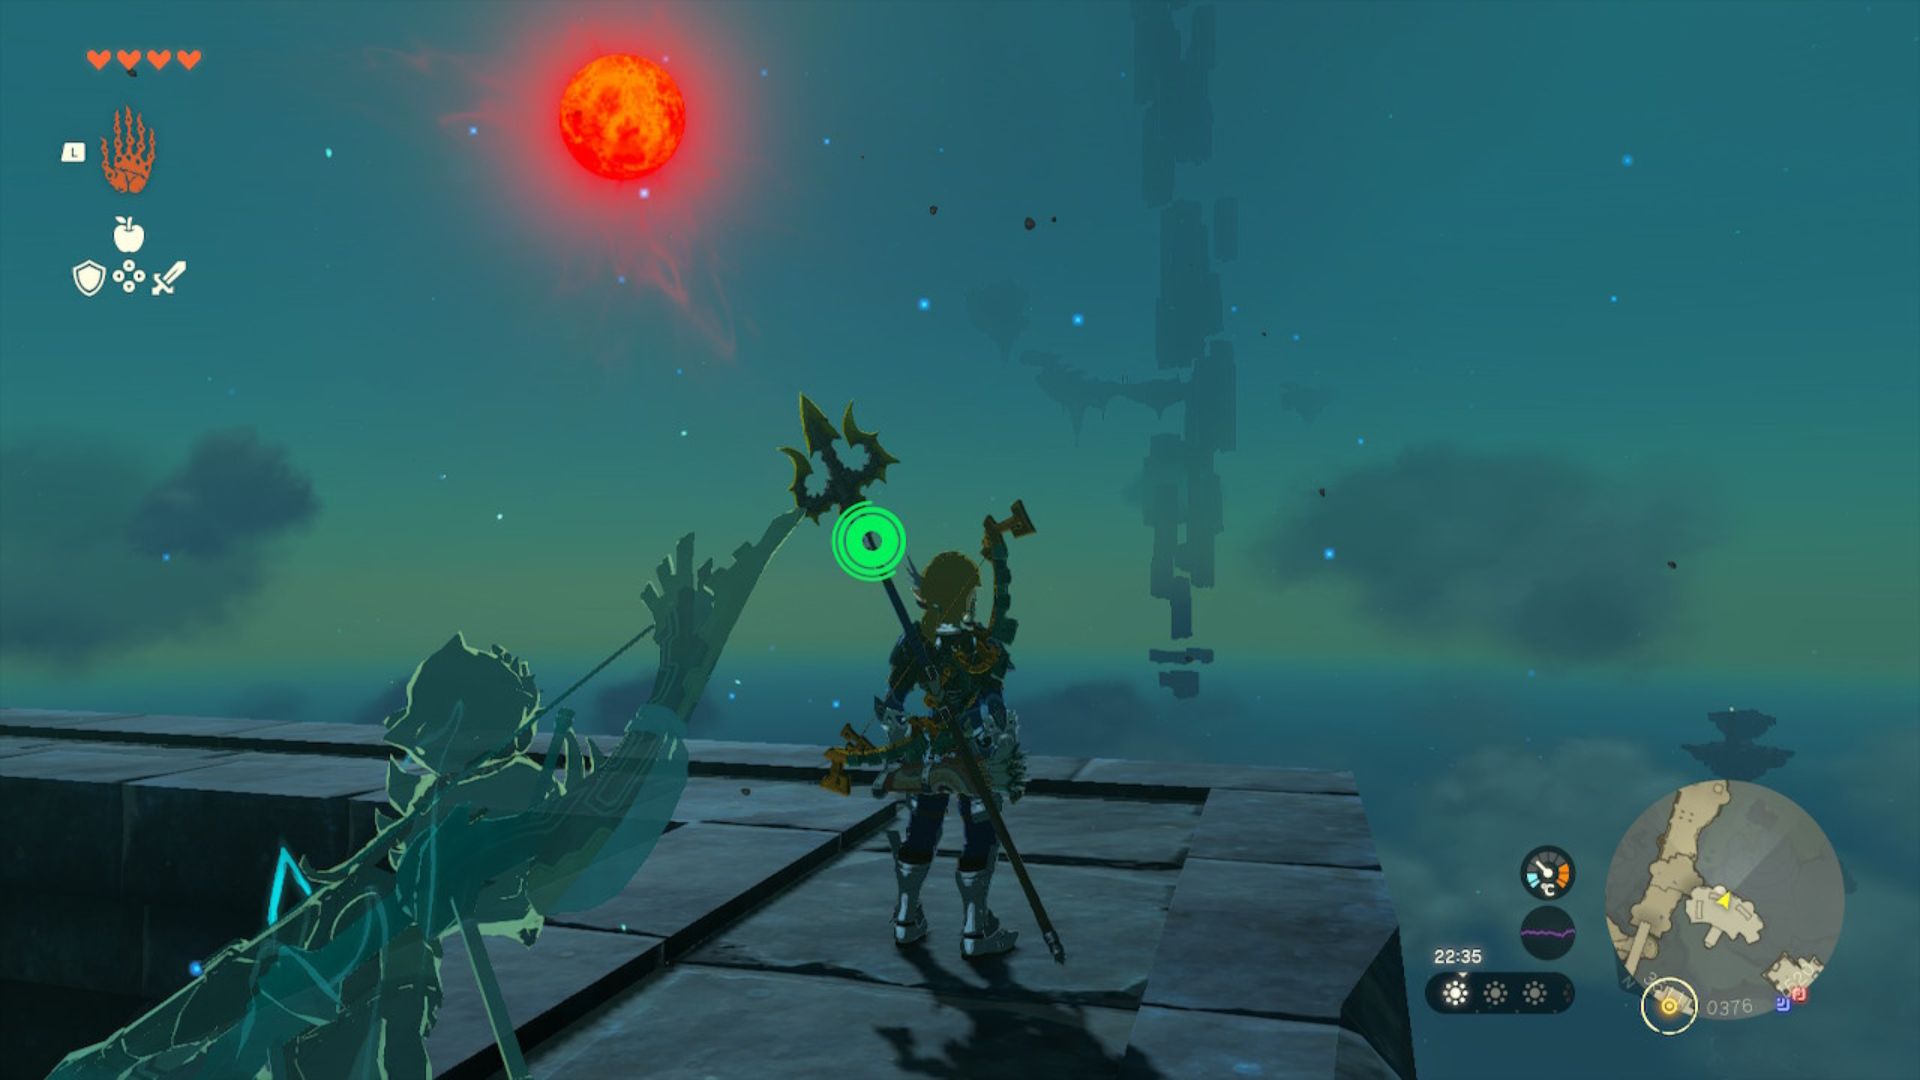 Zelda Tears of the Kingdom review - Link, a blonde man with a trident on his back stood next to a bird creature on a stony platform looking out at a green and blue sky with a couple of clouds and a red moon. In the distance, geometric shapes float in the sky upwards in a loose pillar.